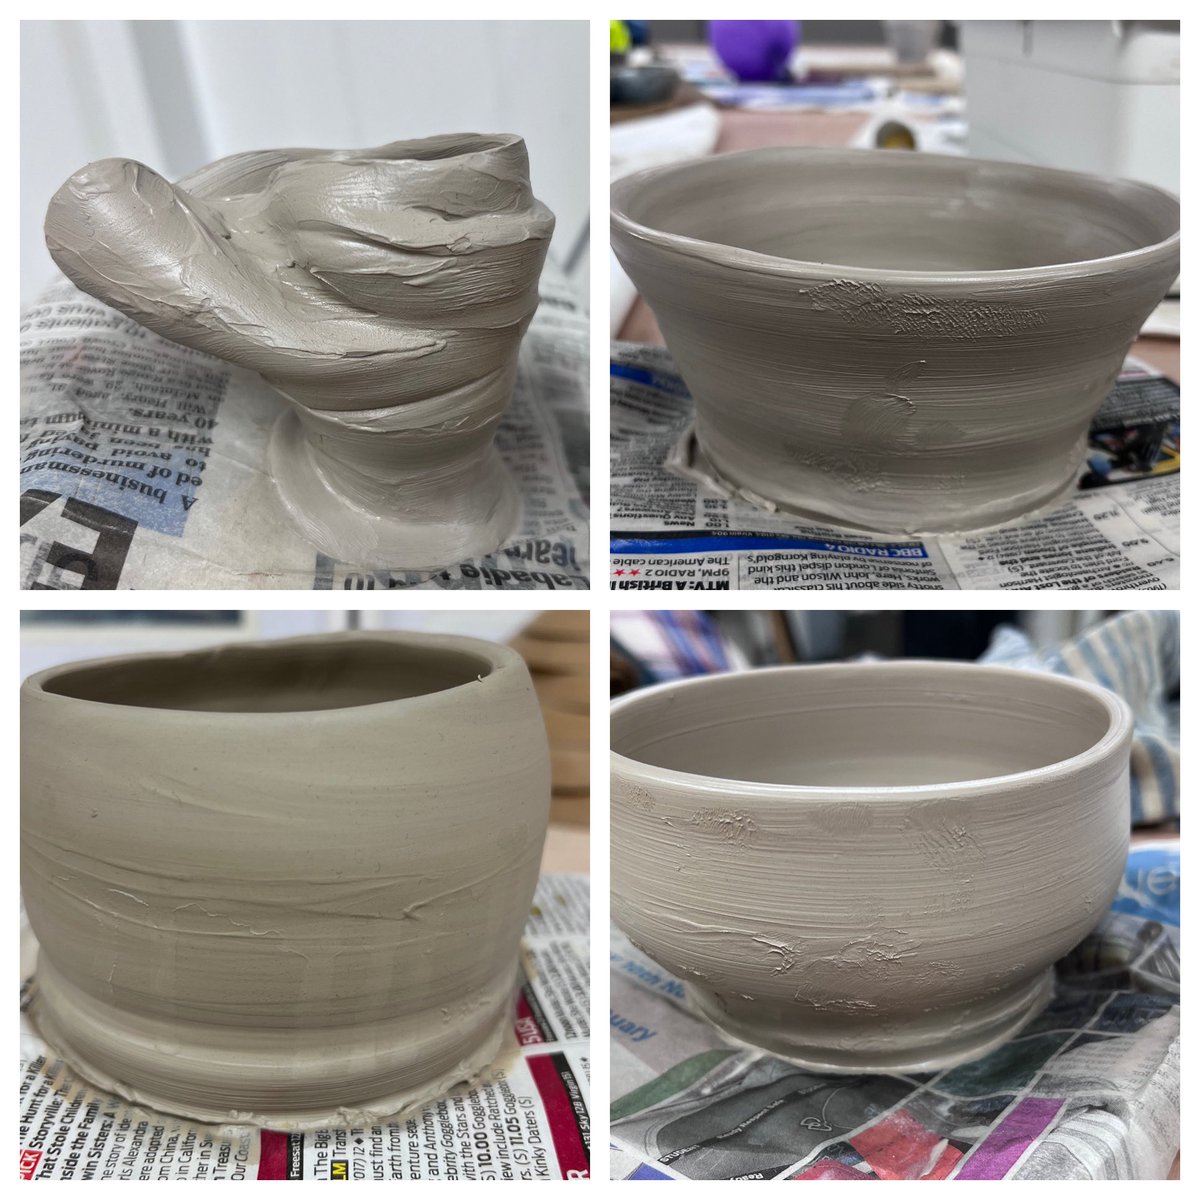 My fabulous students made these bowls today, I particularly like the top left one. What a fun day 😂